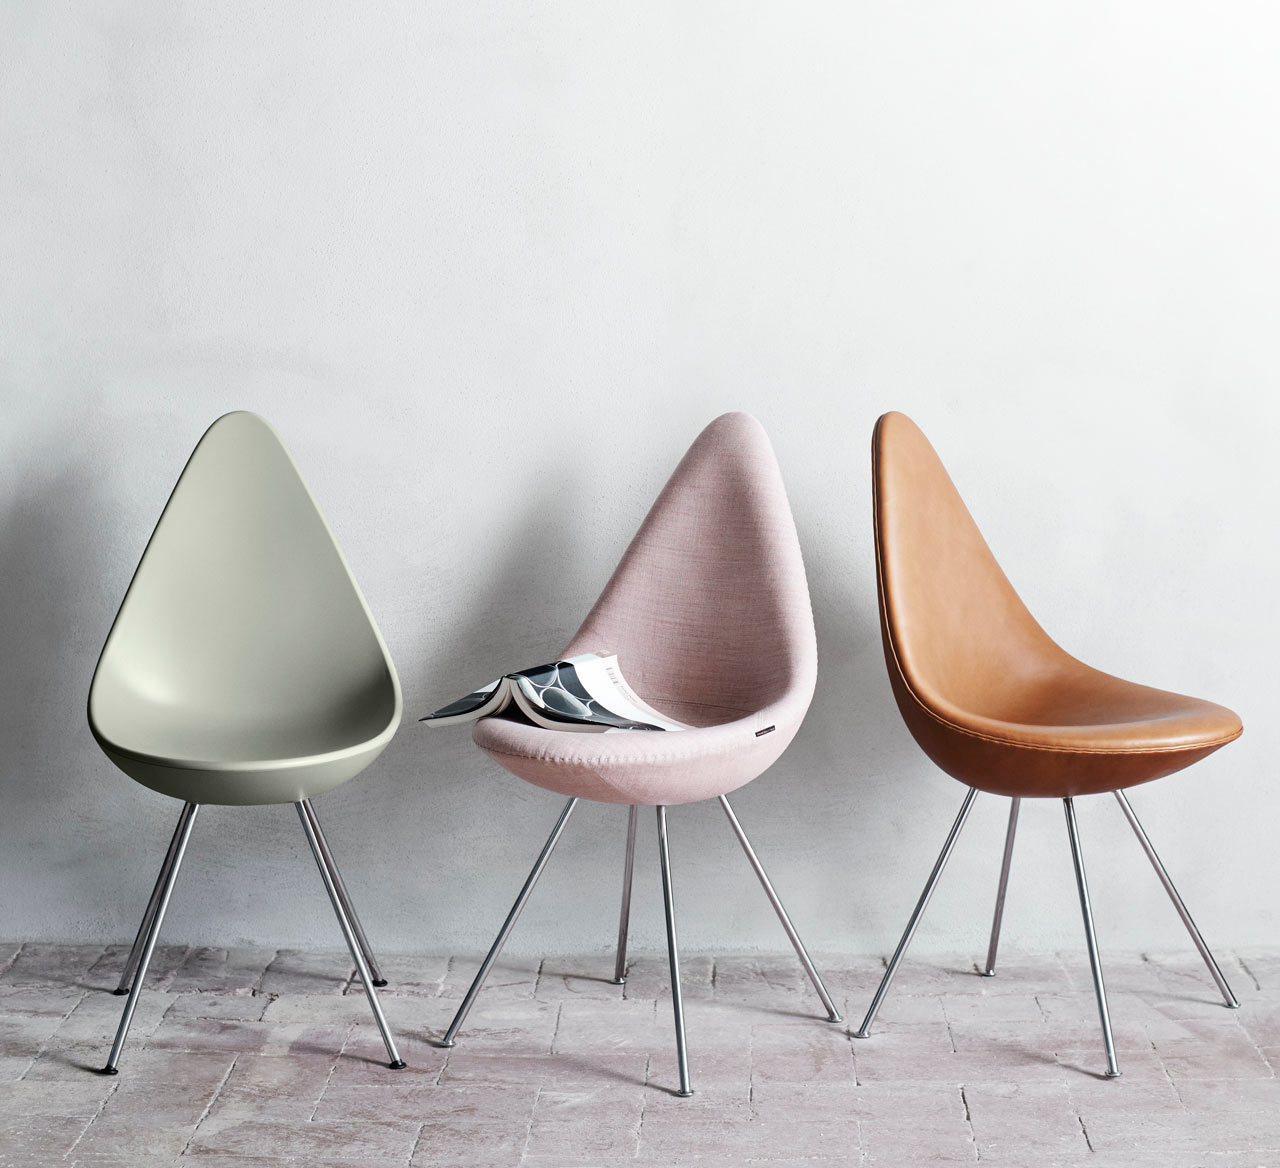 Arne Jacobsen’s Drop Chair Comes Back to Life